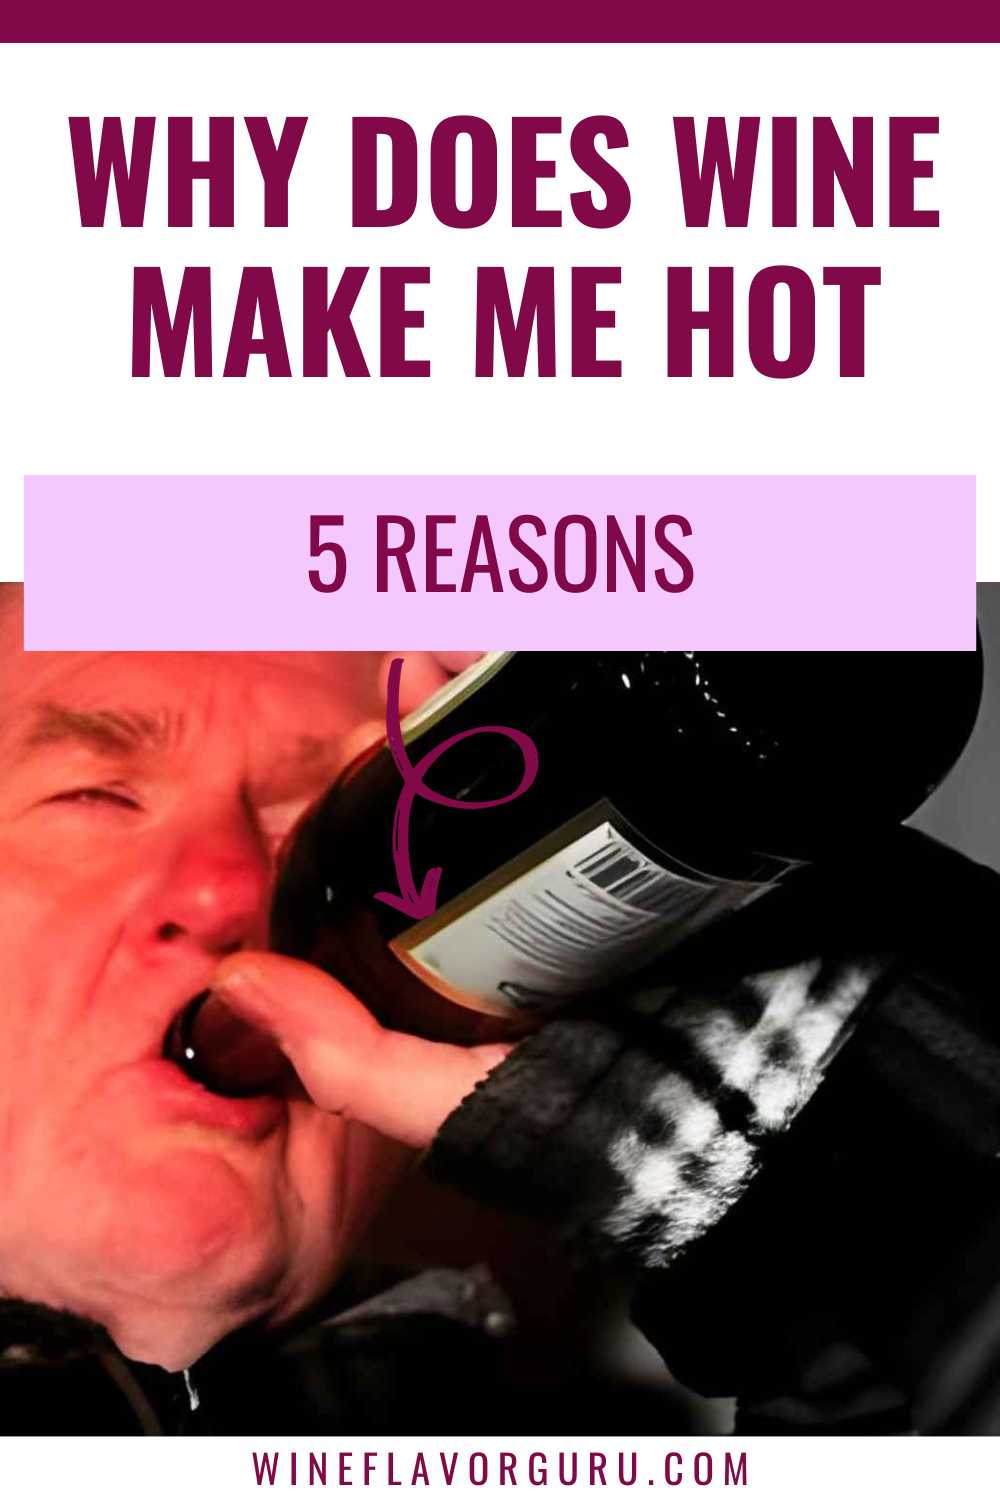 Why Does Wine Make Me Hot